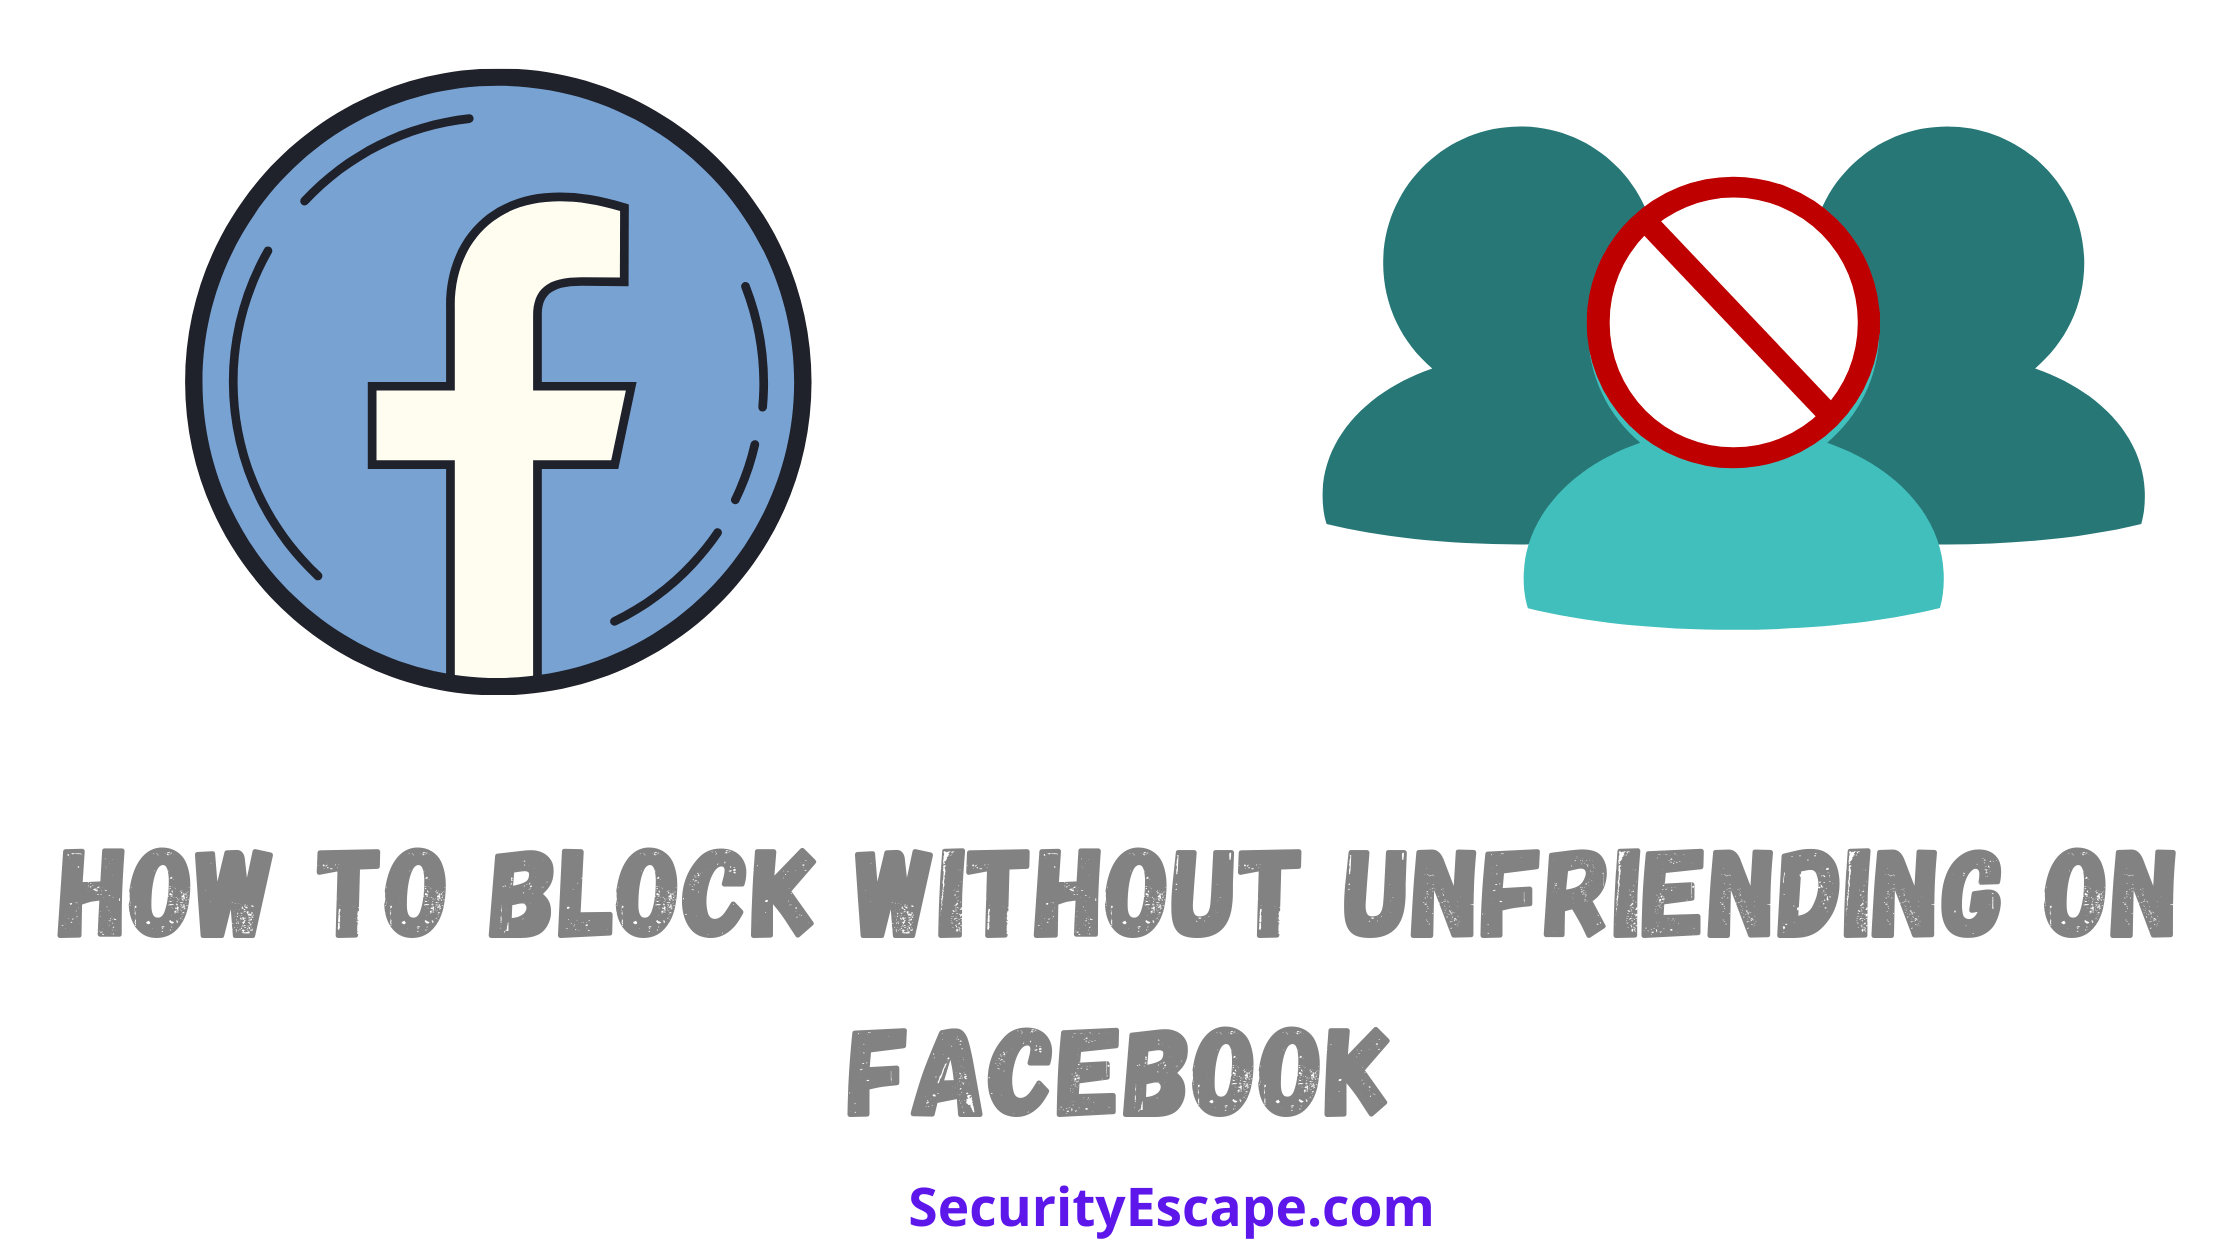 How to block without unfriending on Facebook